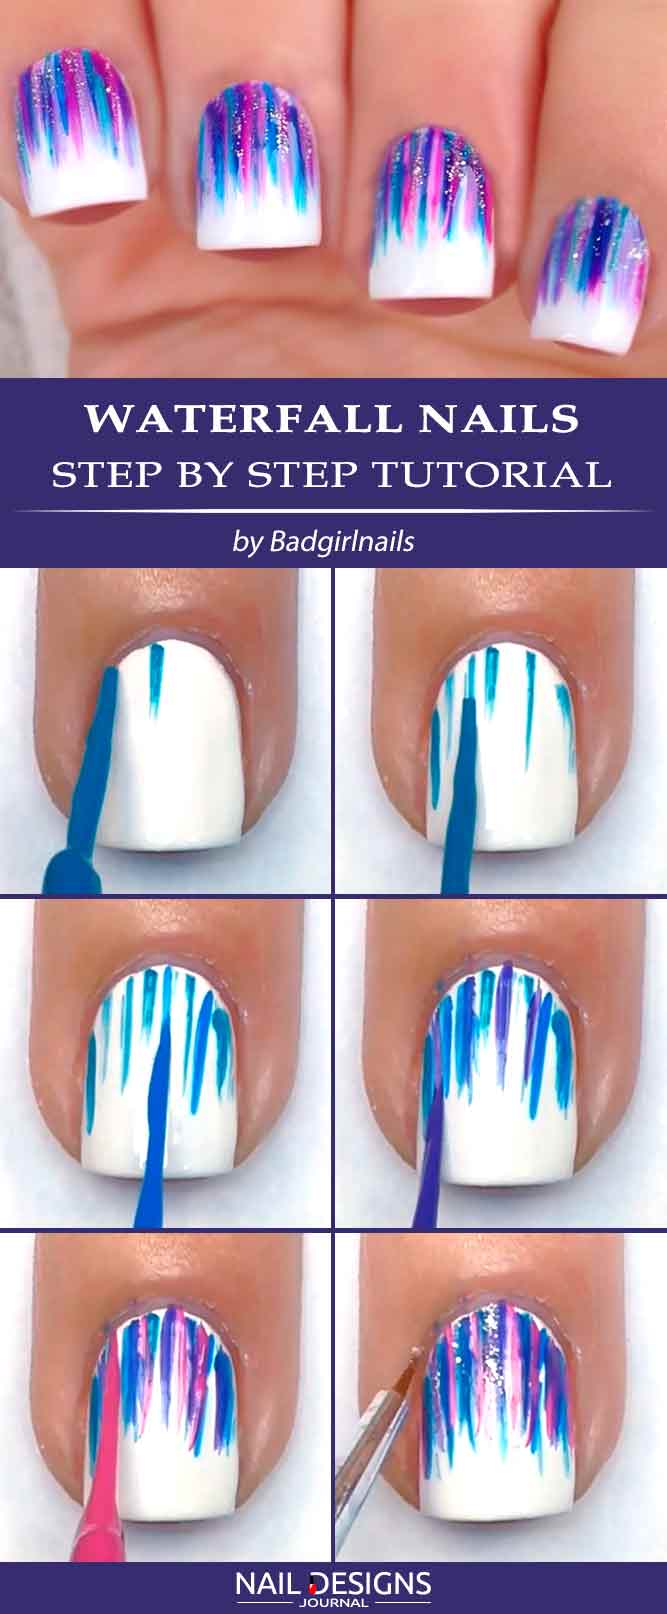 Waterfall Nails Step By Step Tutorial